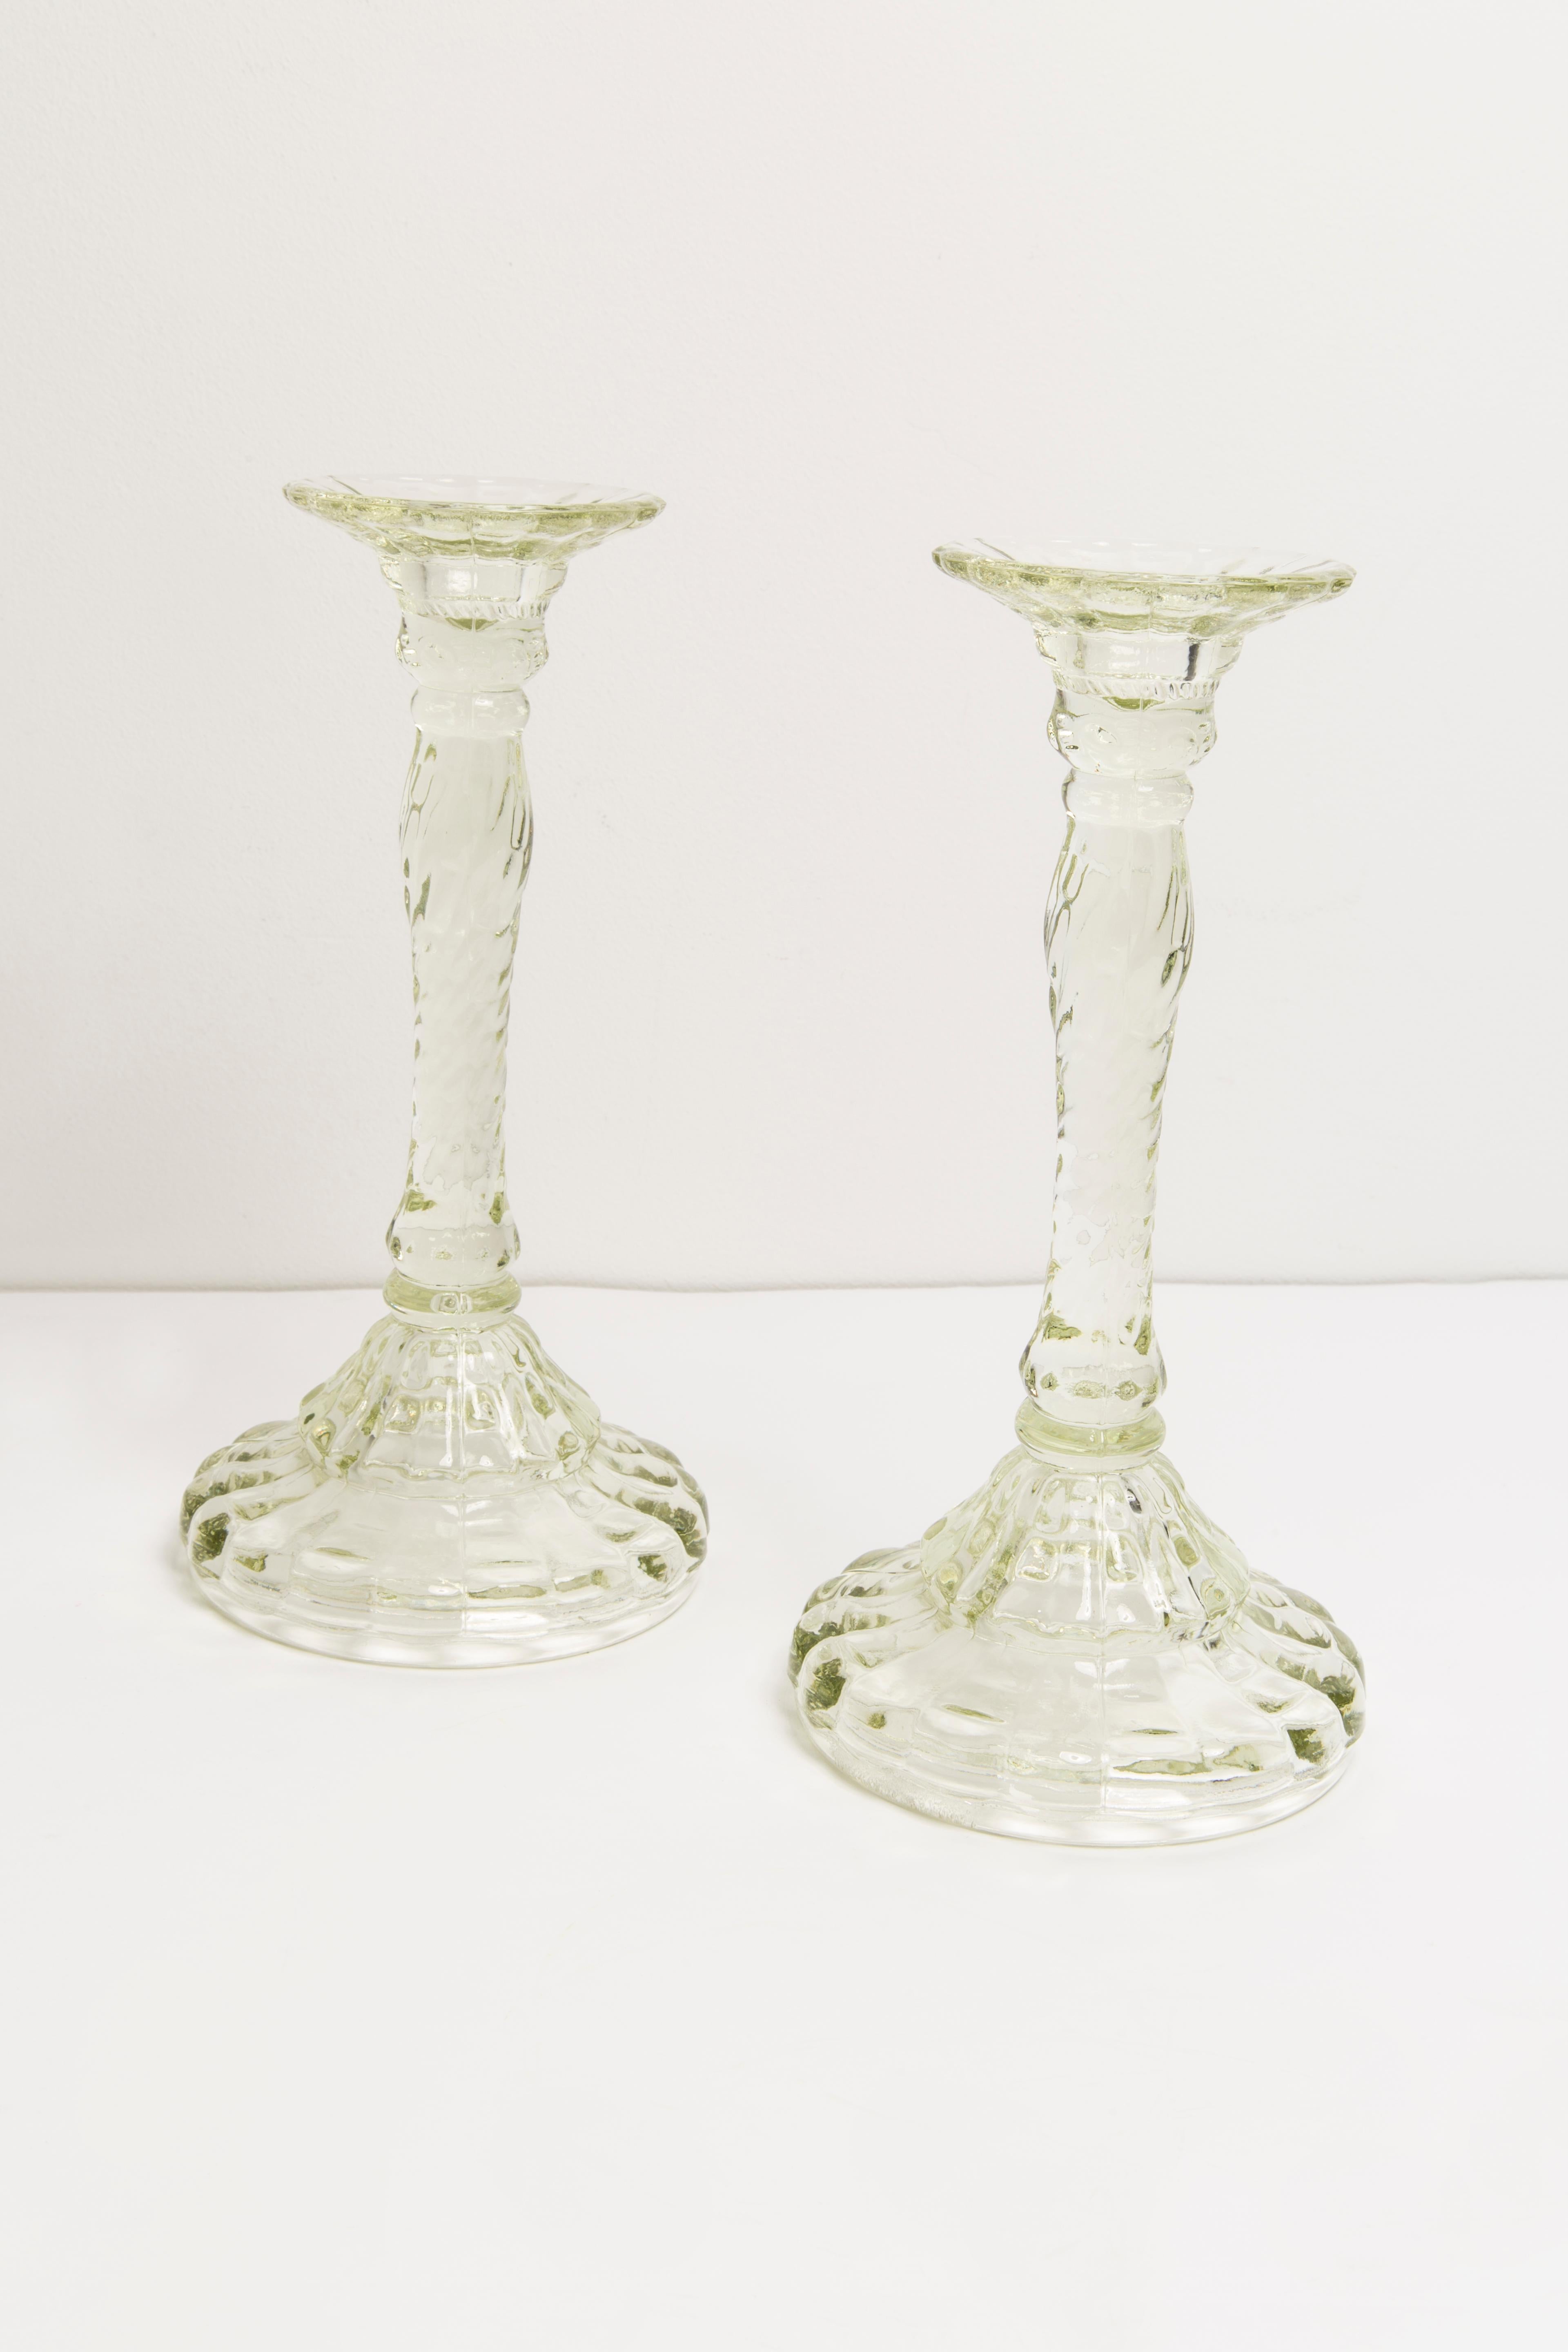 Set of two midcentury Polish modern glass candlesticks, circa 1960. 
Very good condition. No damages. Beautiful light green glass.